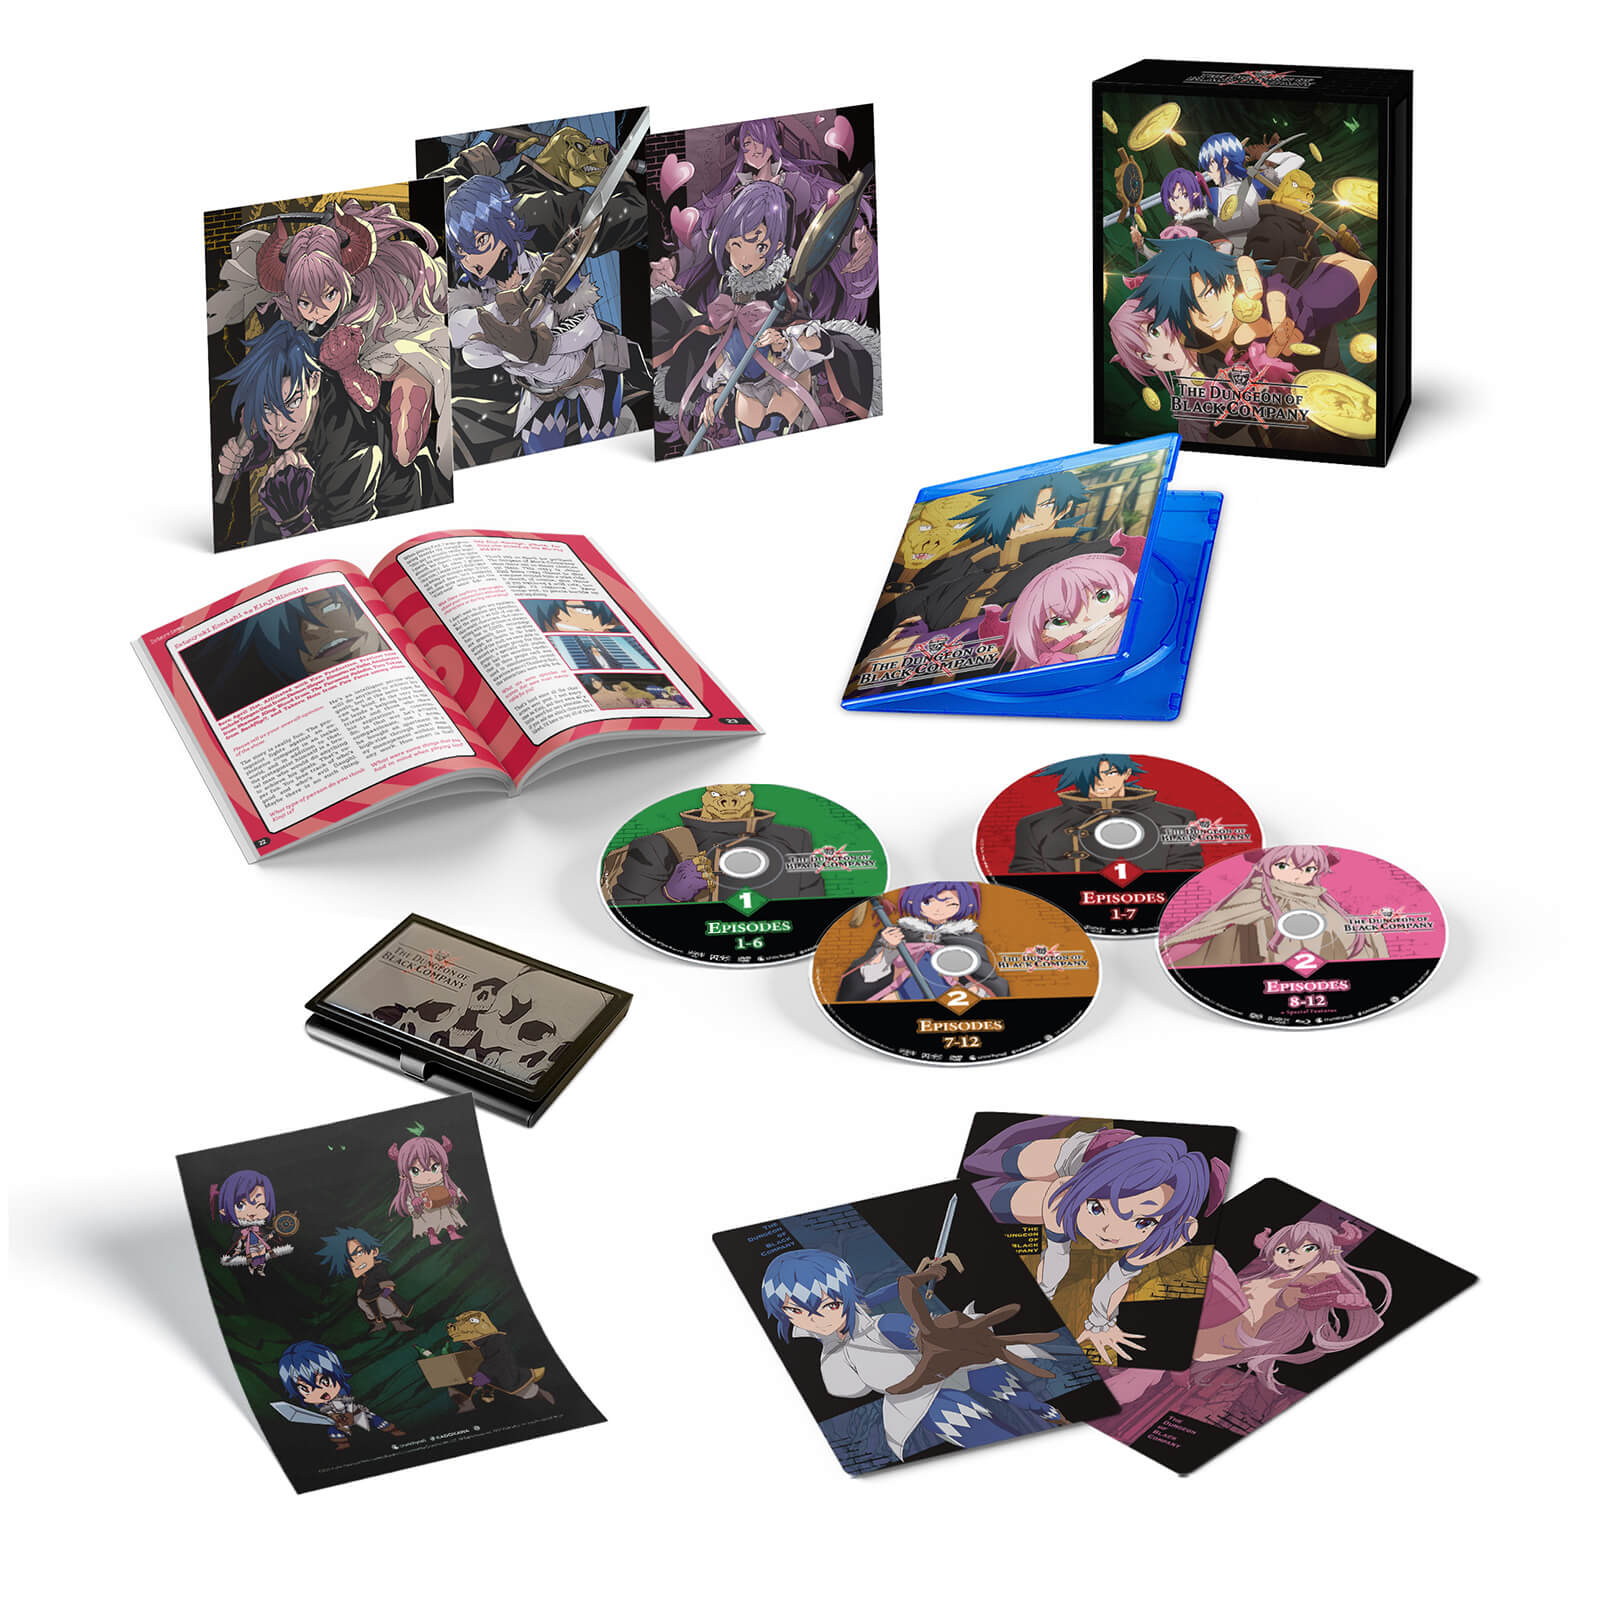 crunchyroll the dungeon of black company - the complete season limited edition